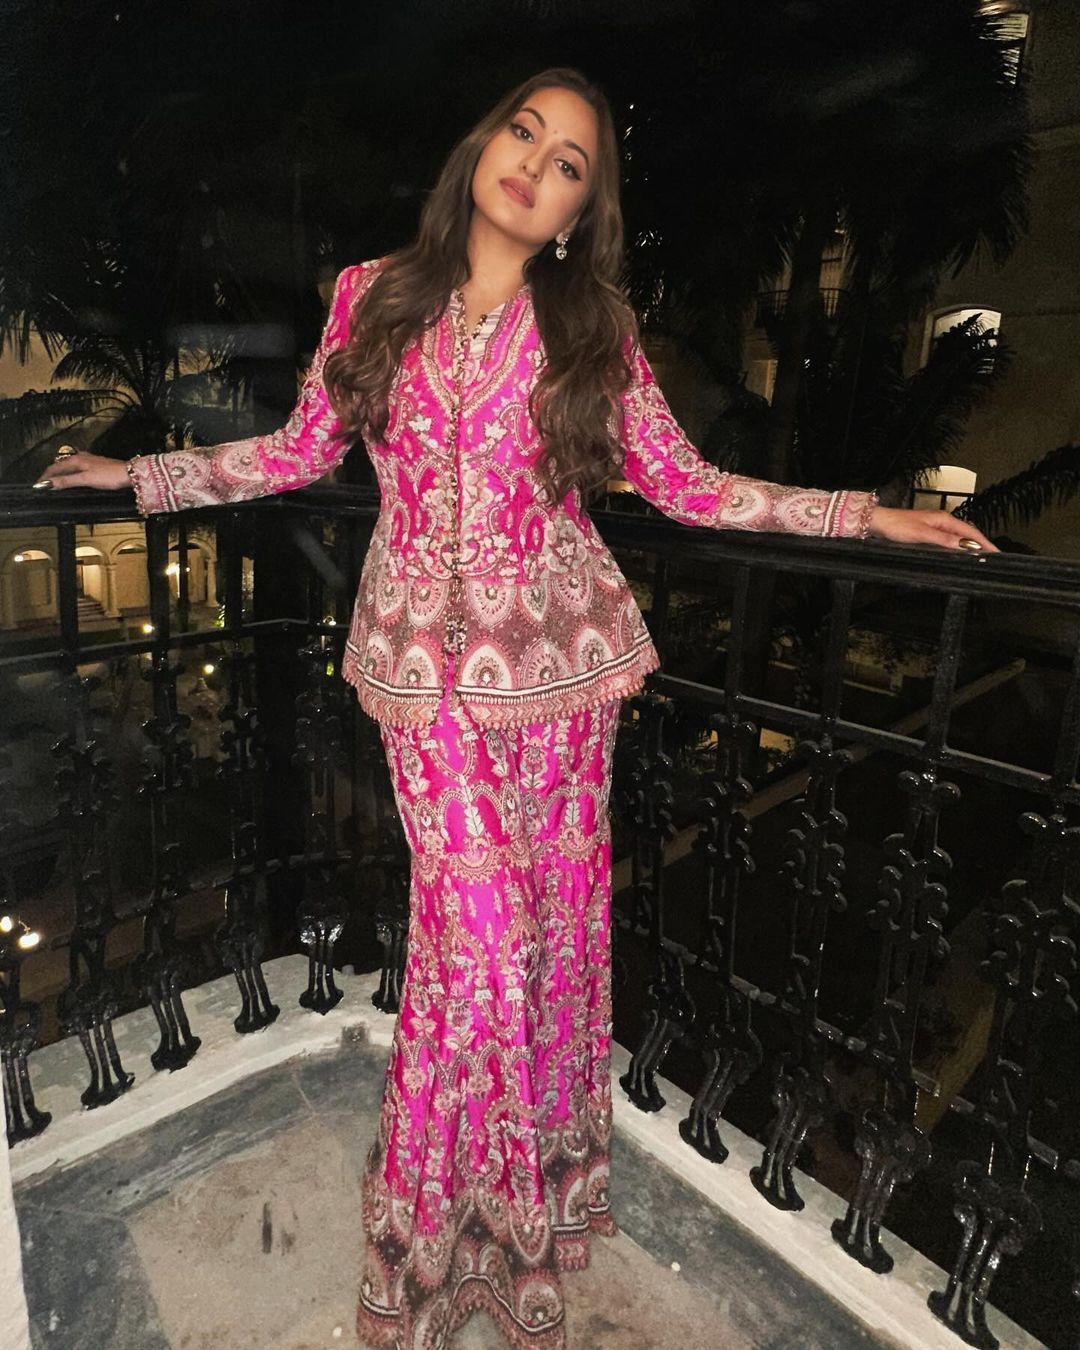 Sonakshi Sinha wore a heavily embroidered pink kurta set. She left her hair open and added a stud earring to finish her look. This is a perfect outfit to ace your bridesmaid look